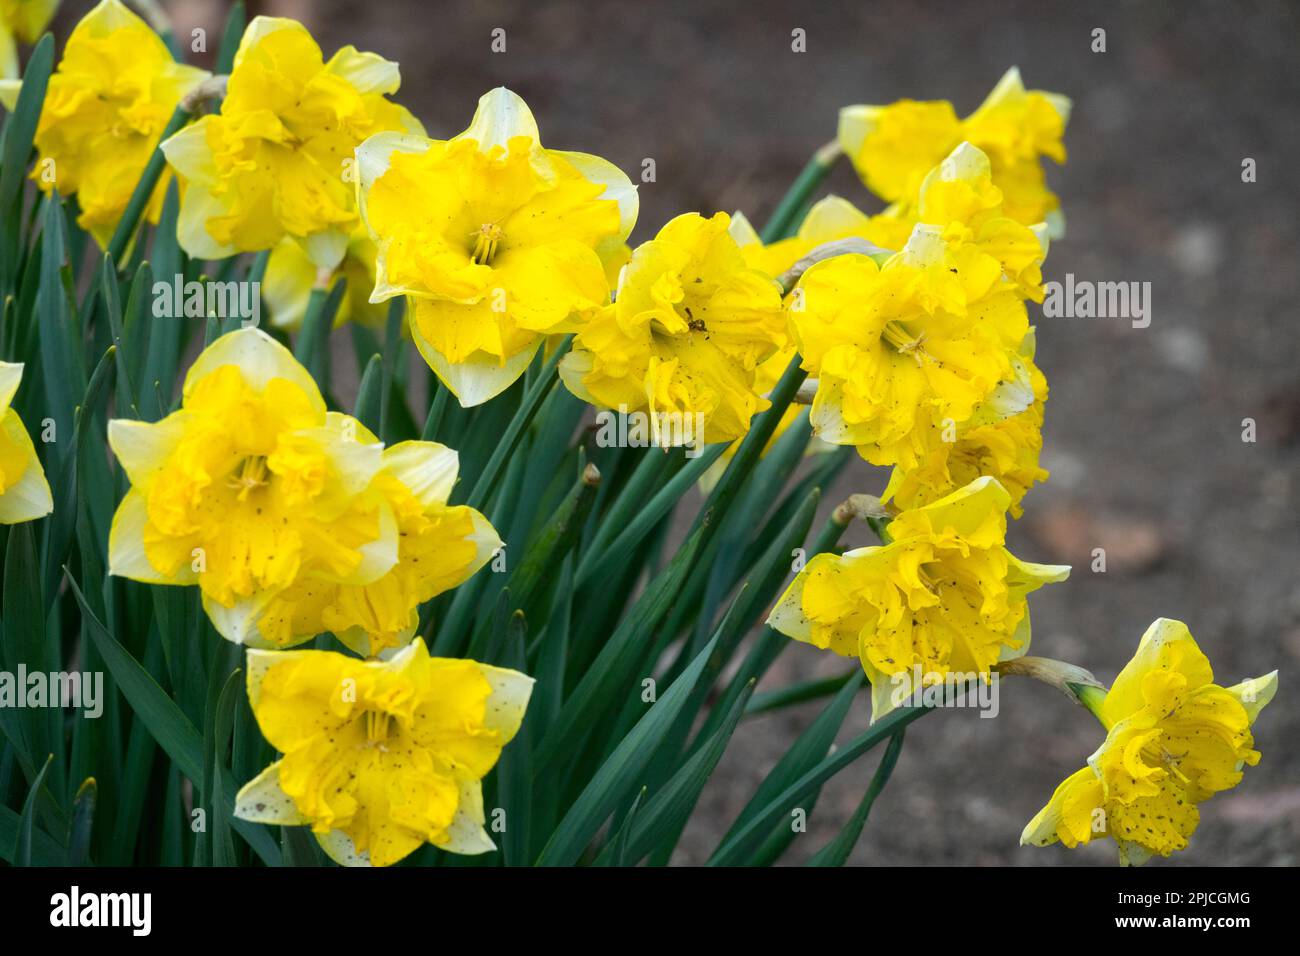 Amaryllidaceae, Daffodils Narcissus 'Chanterelle' Blooms Stock Photo